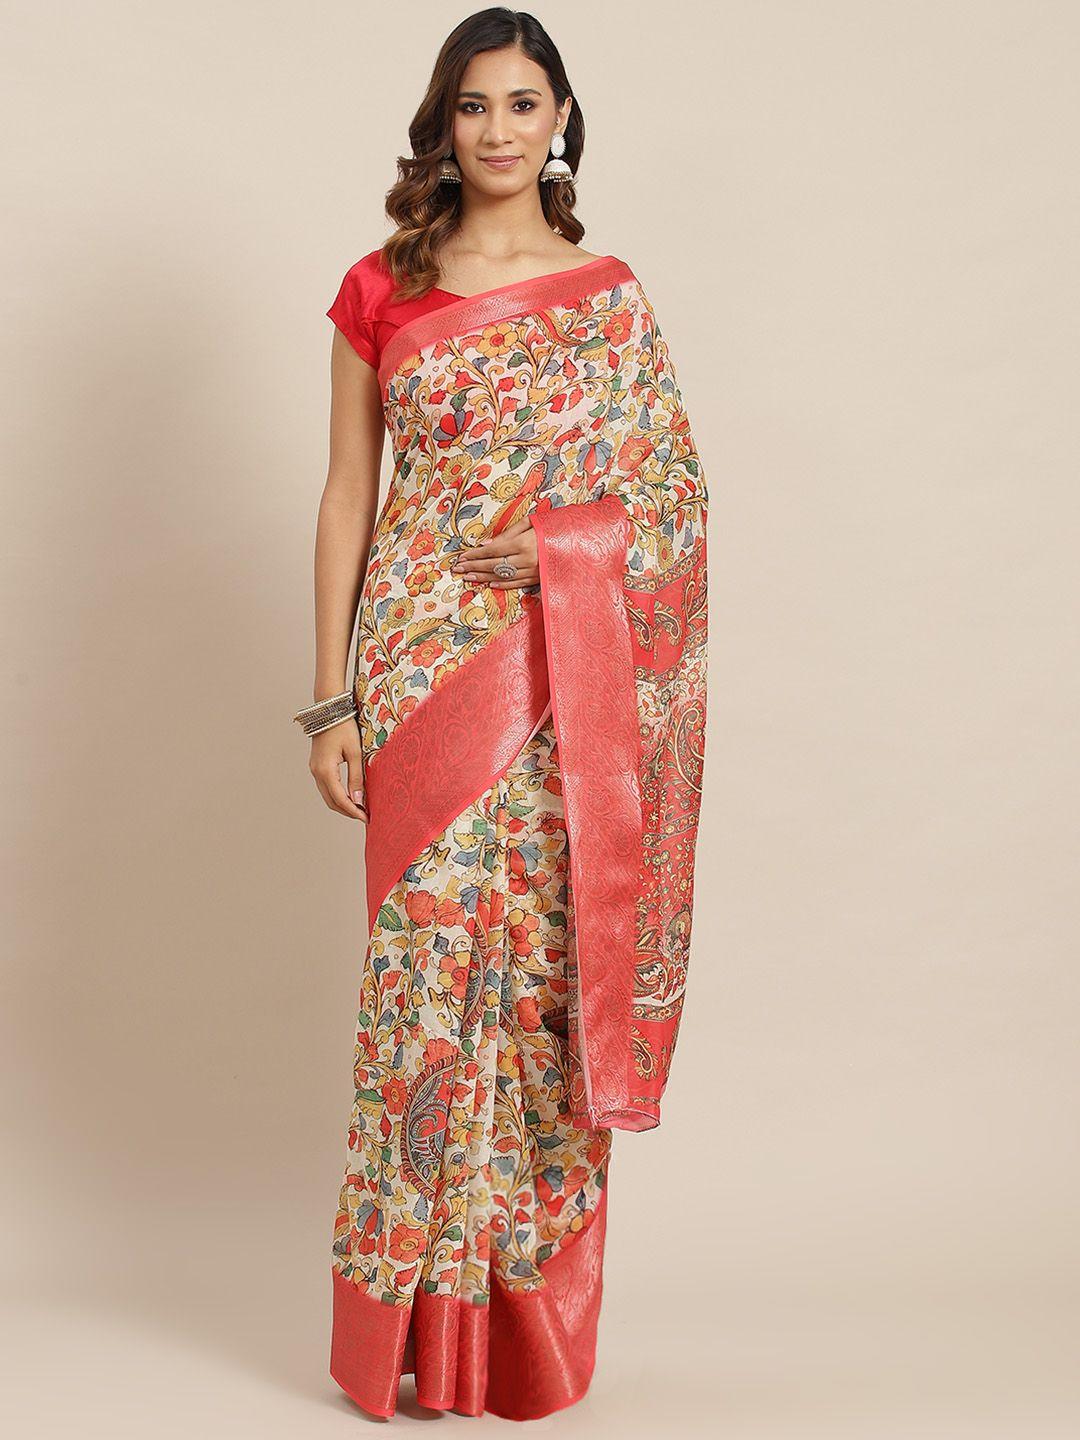 aa-ha off white & red floral jaquard printed saree